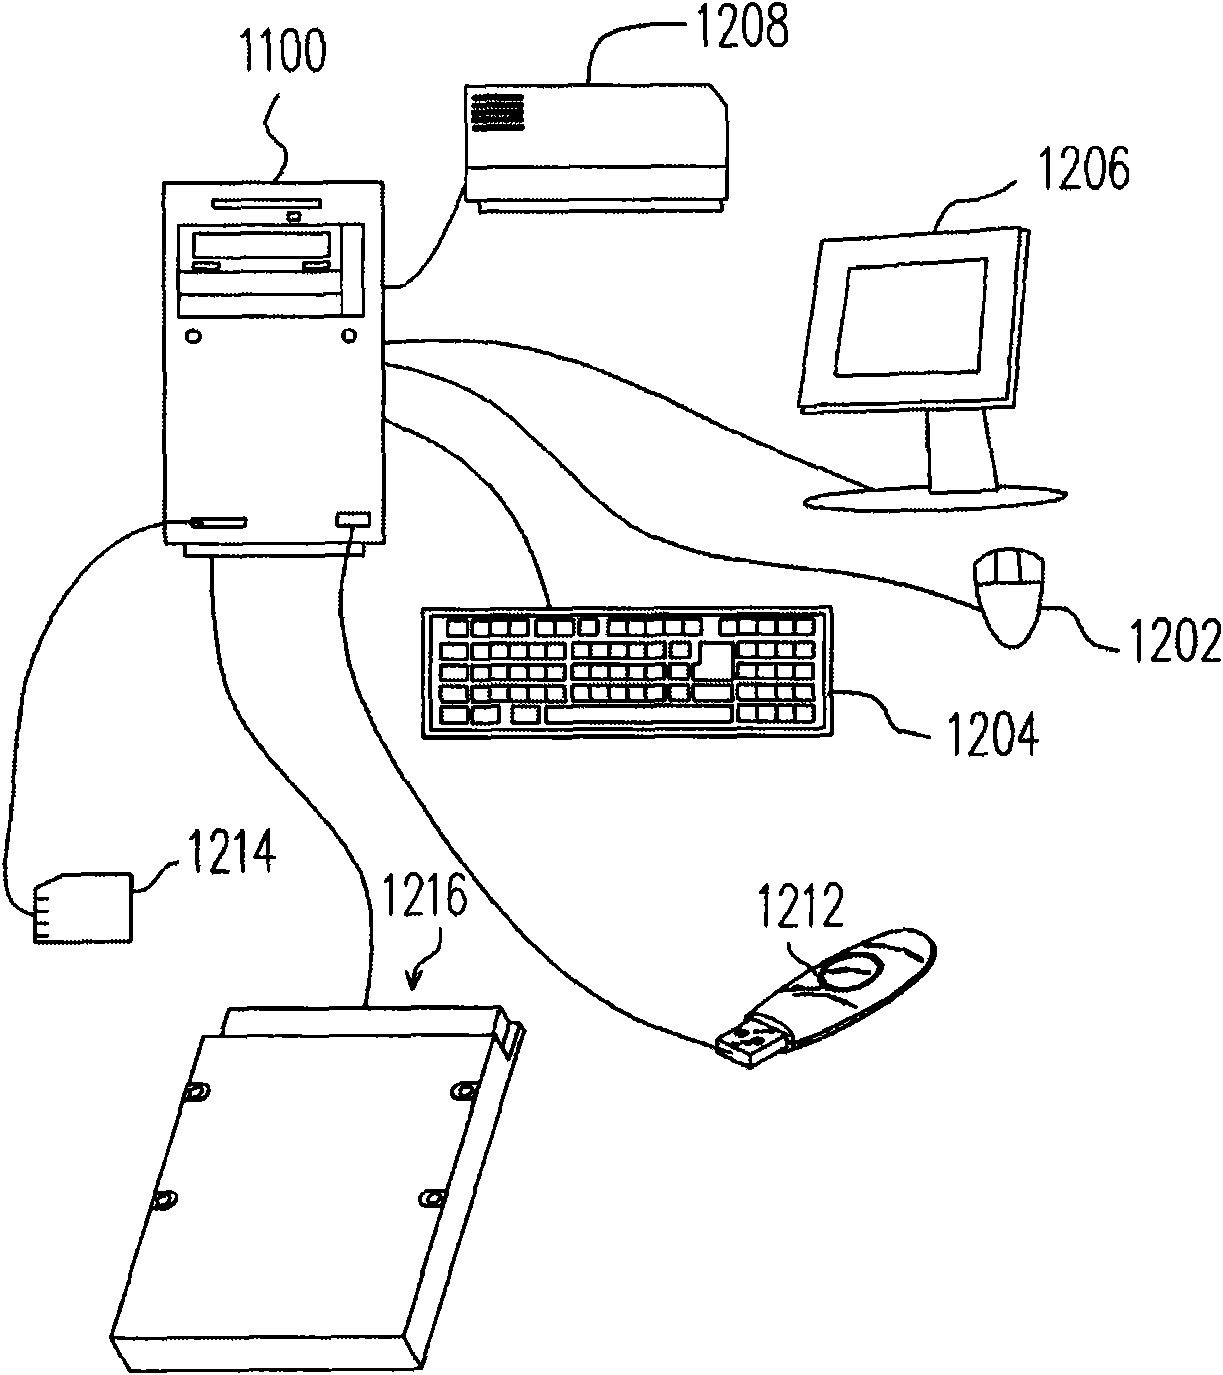 Data processing method and system